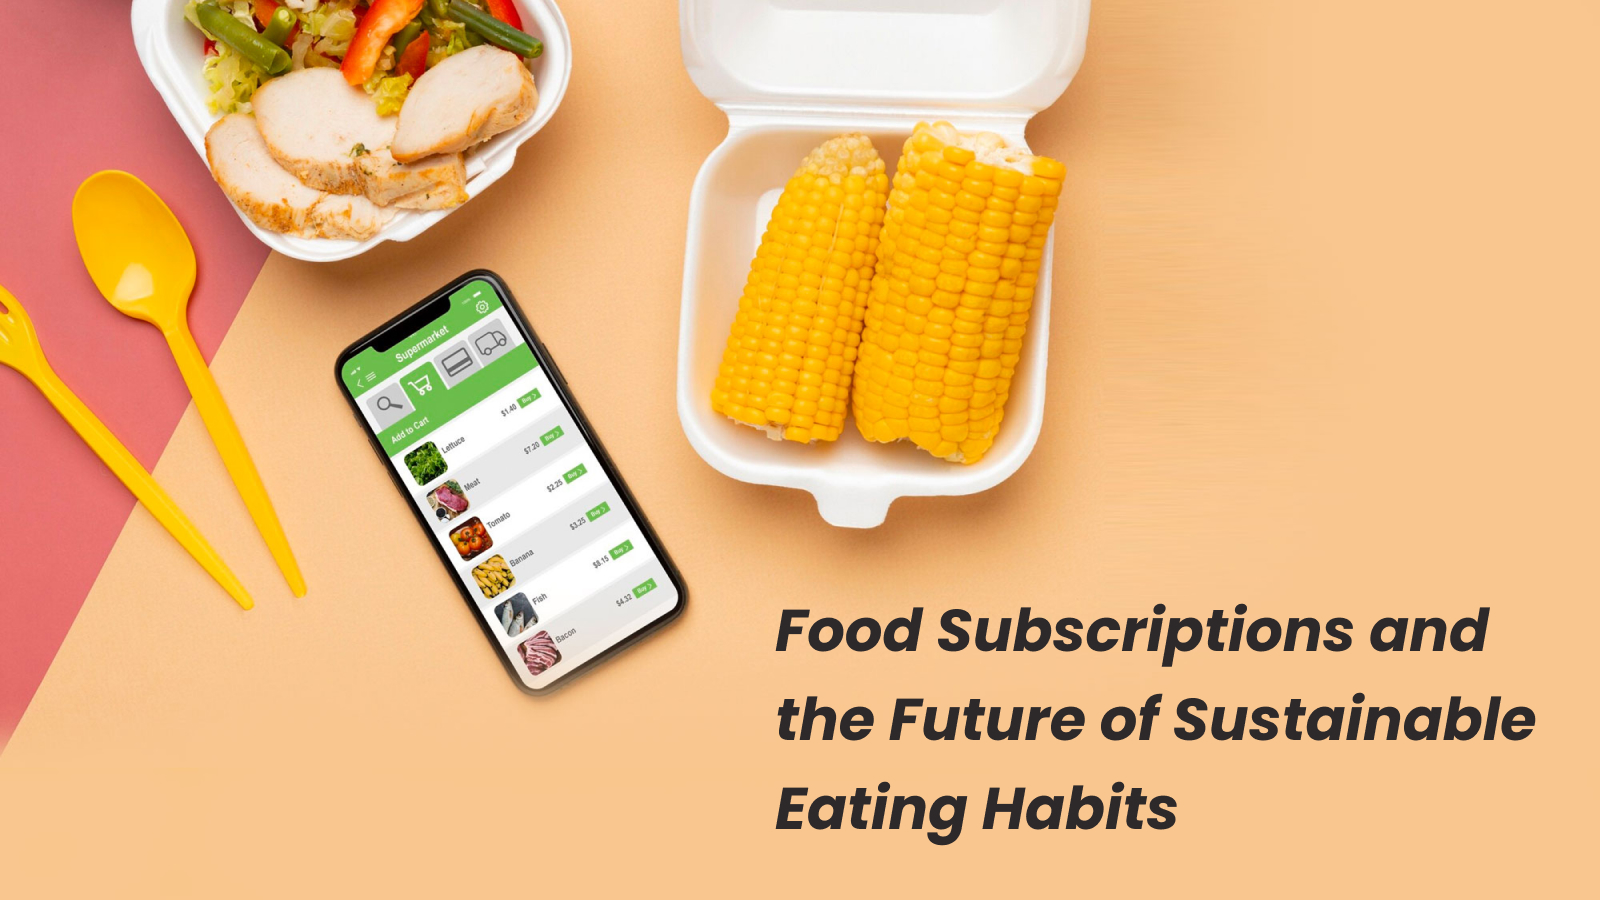 Food Subscriptions and the Future of Sustainable Eating Habits